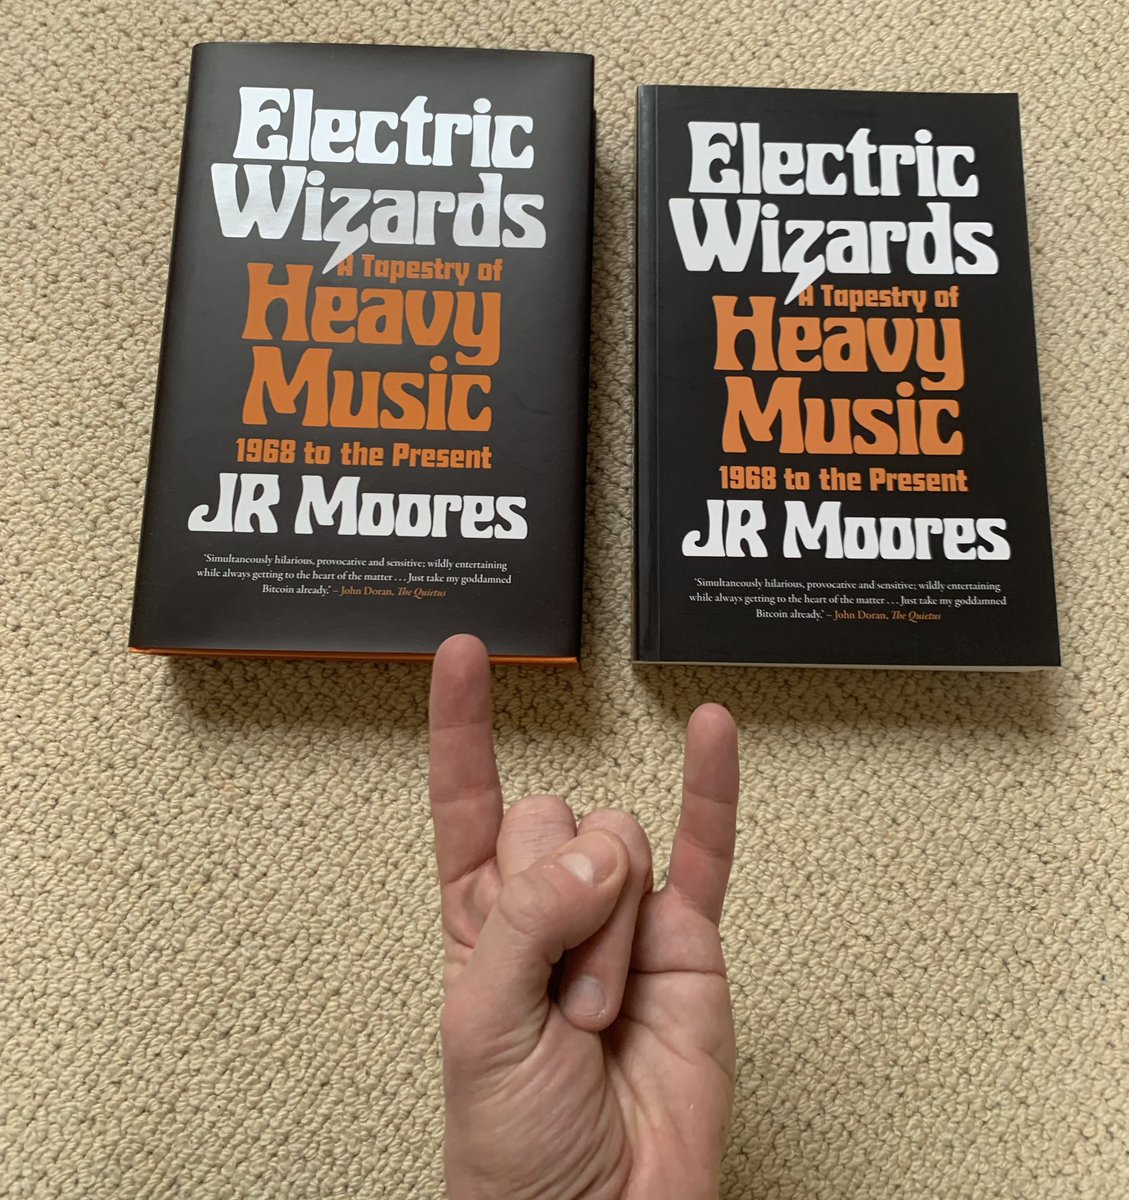 Happy World Book Day! #WorldBookDay Here’s this beauty in both its hardback and paperback forms. If you haven’t read it yet, erm… please do! New book from me arriving later this year (partly designed to diminish any credibility established by Electric Wizards - !!) ⚡️ 🧙‍♂️…